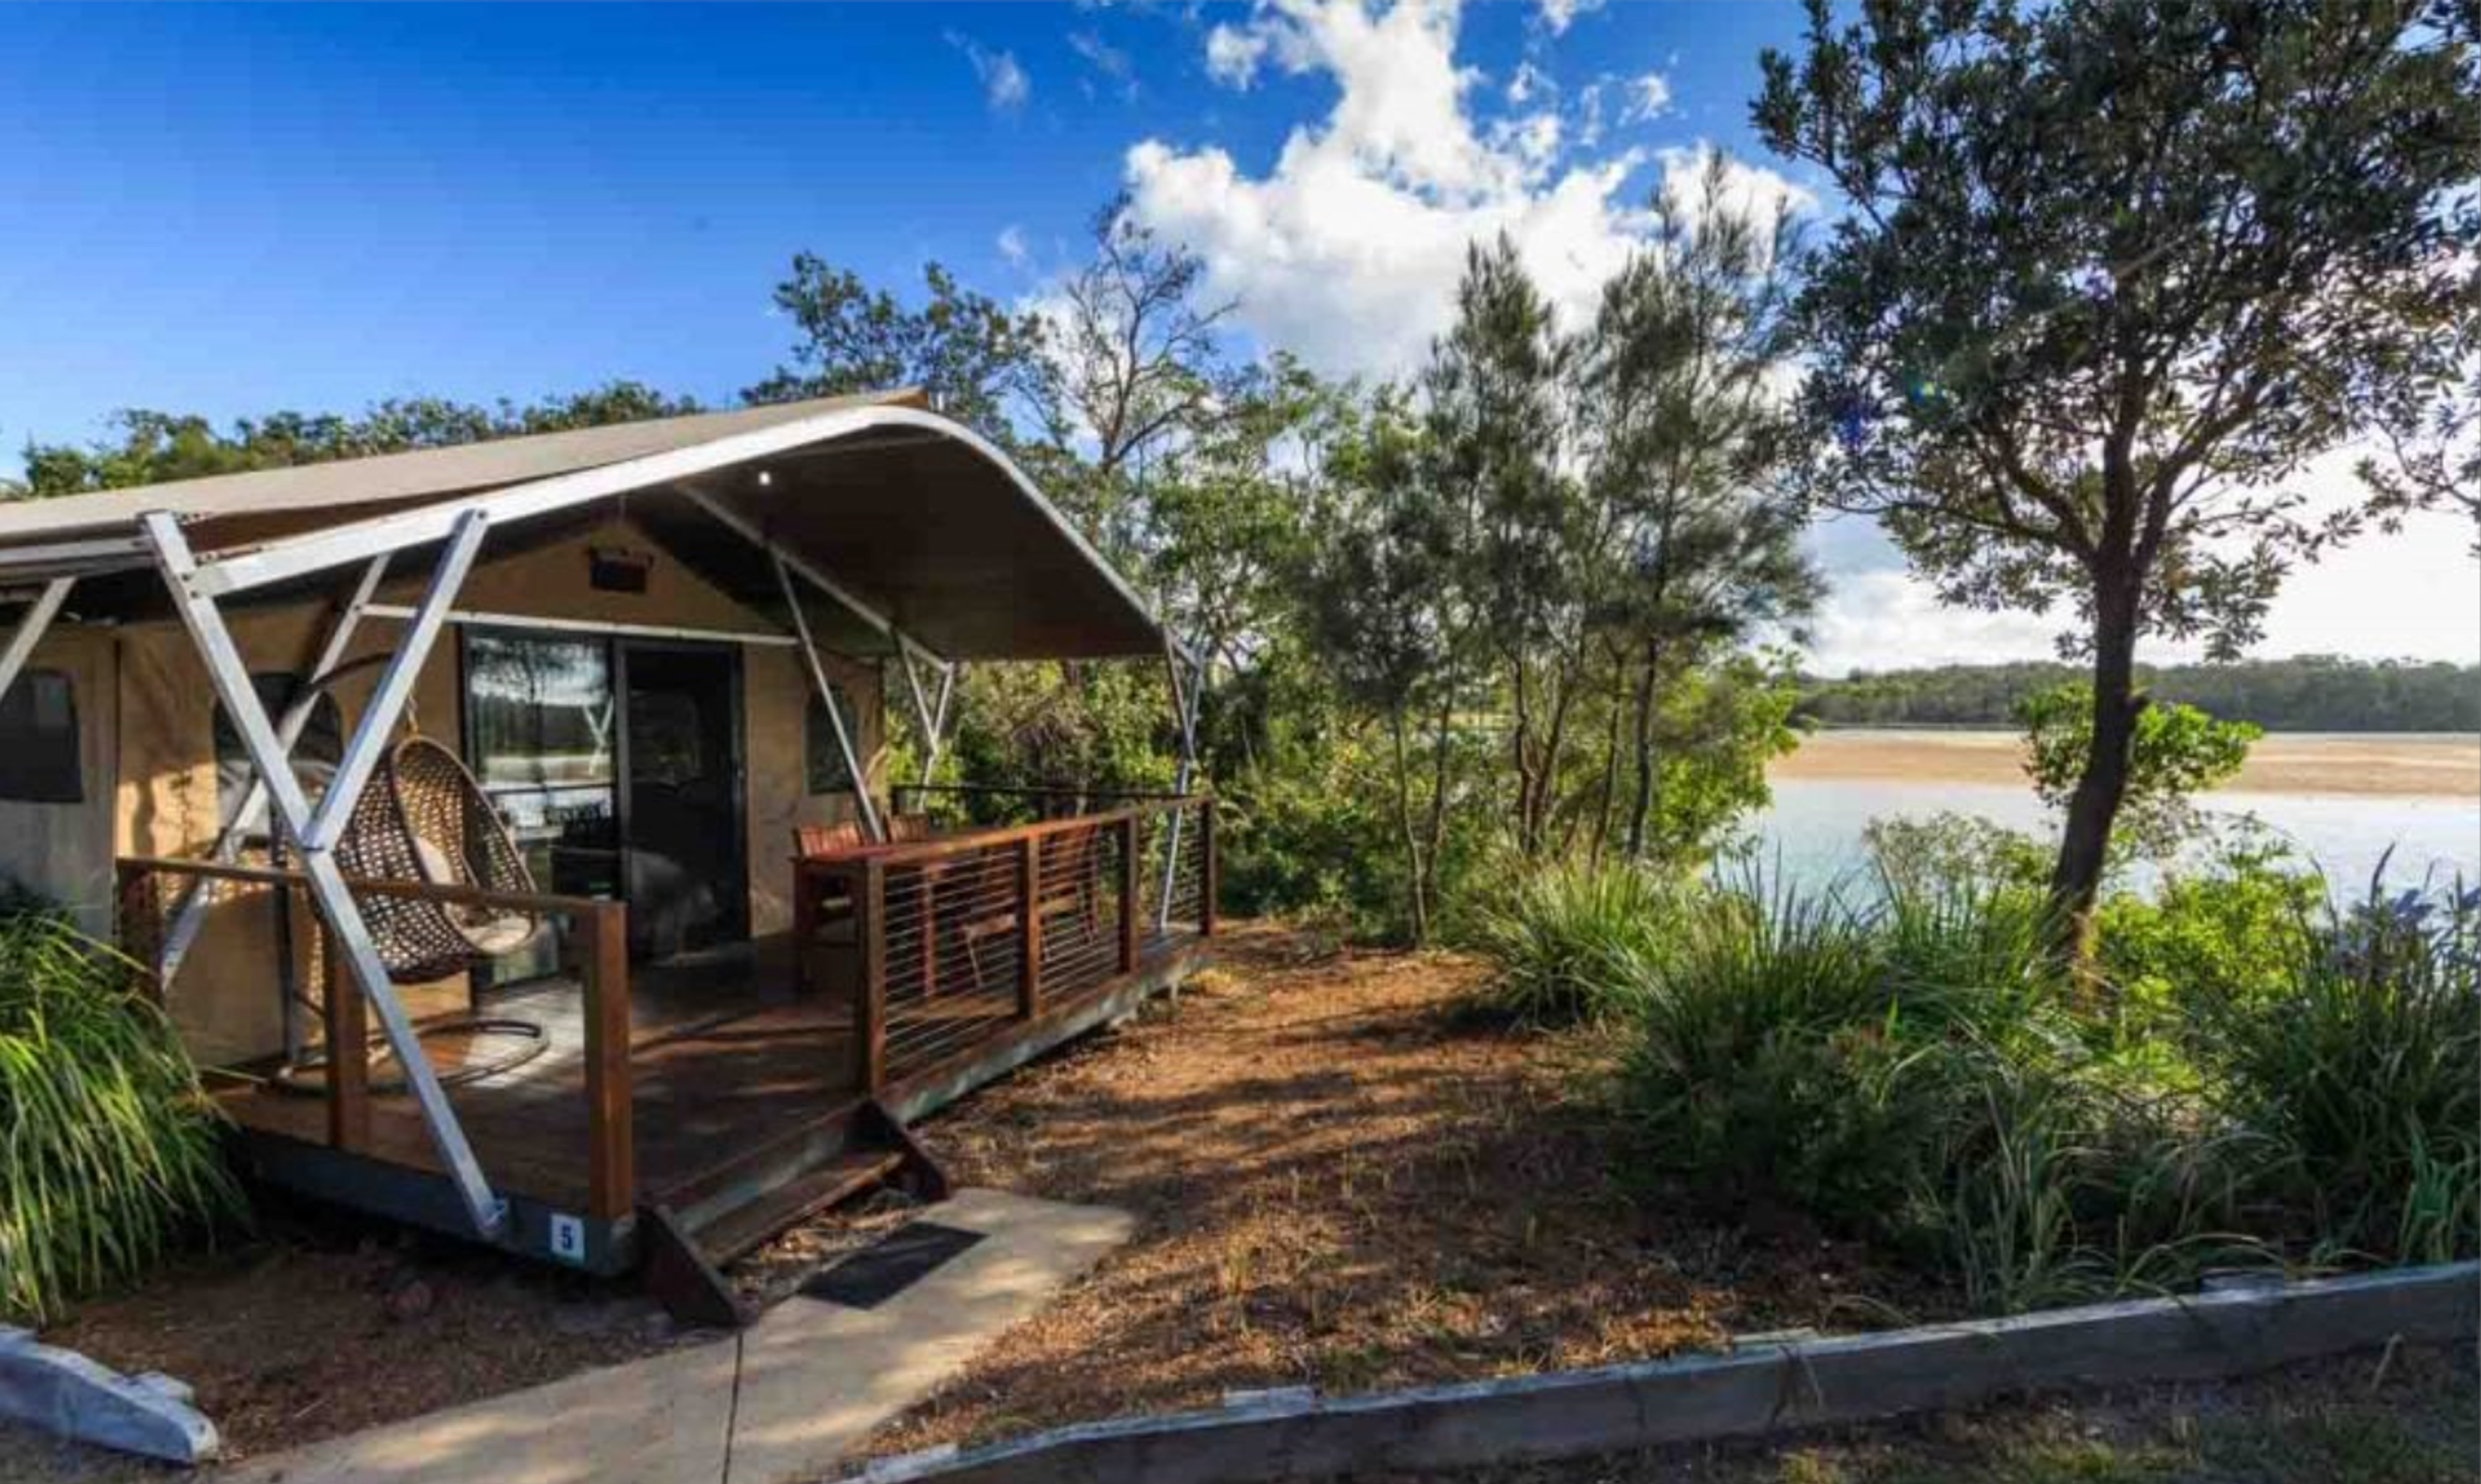 Reflections Red Rock holiday and caravan park glamping accommodation overlooking corindi river